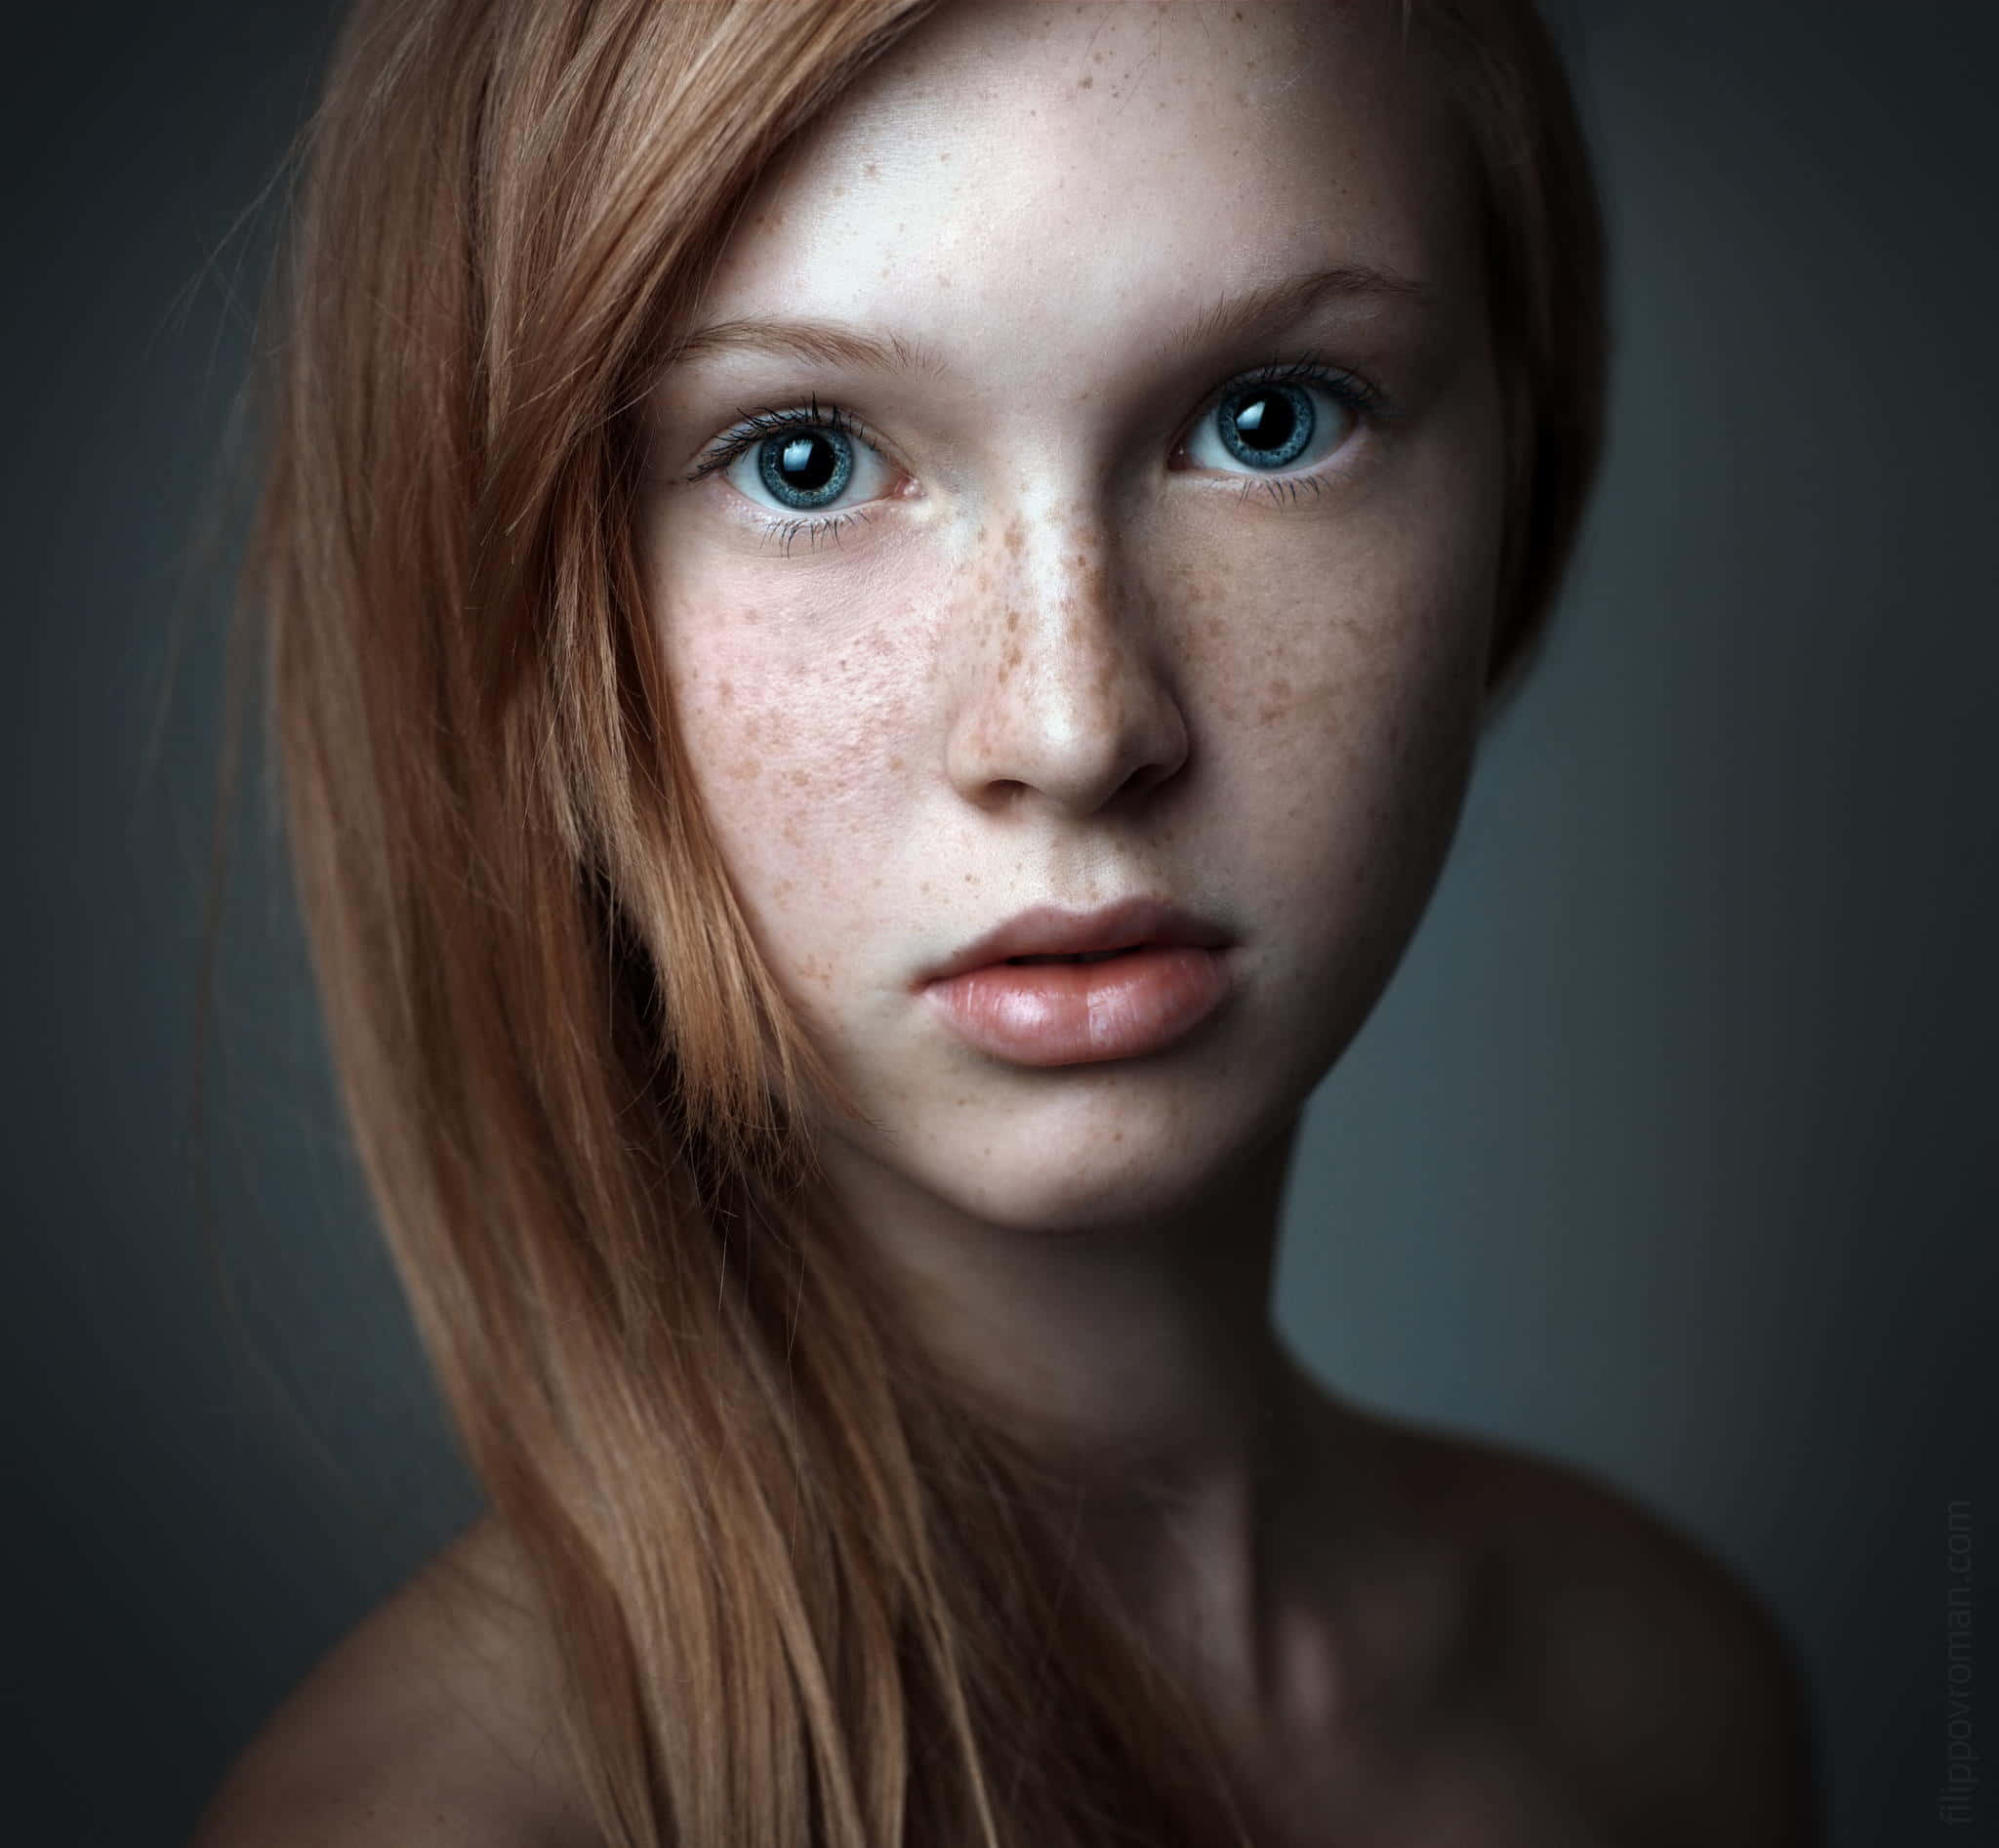 Download Teenage Girl With Freckles Pictures | Wallpapers.com